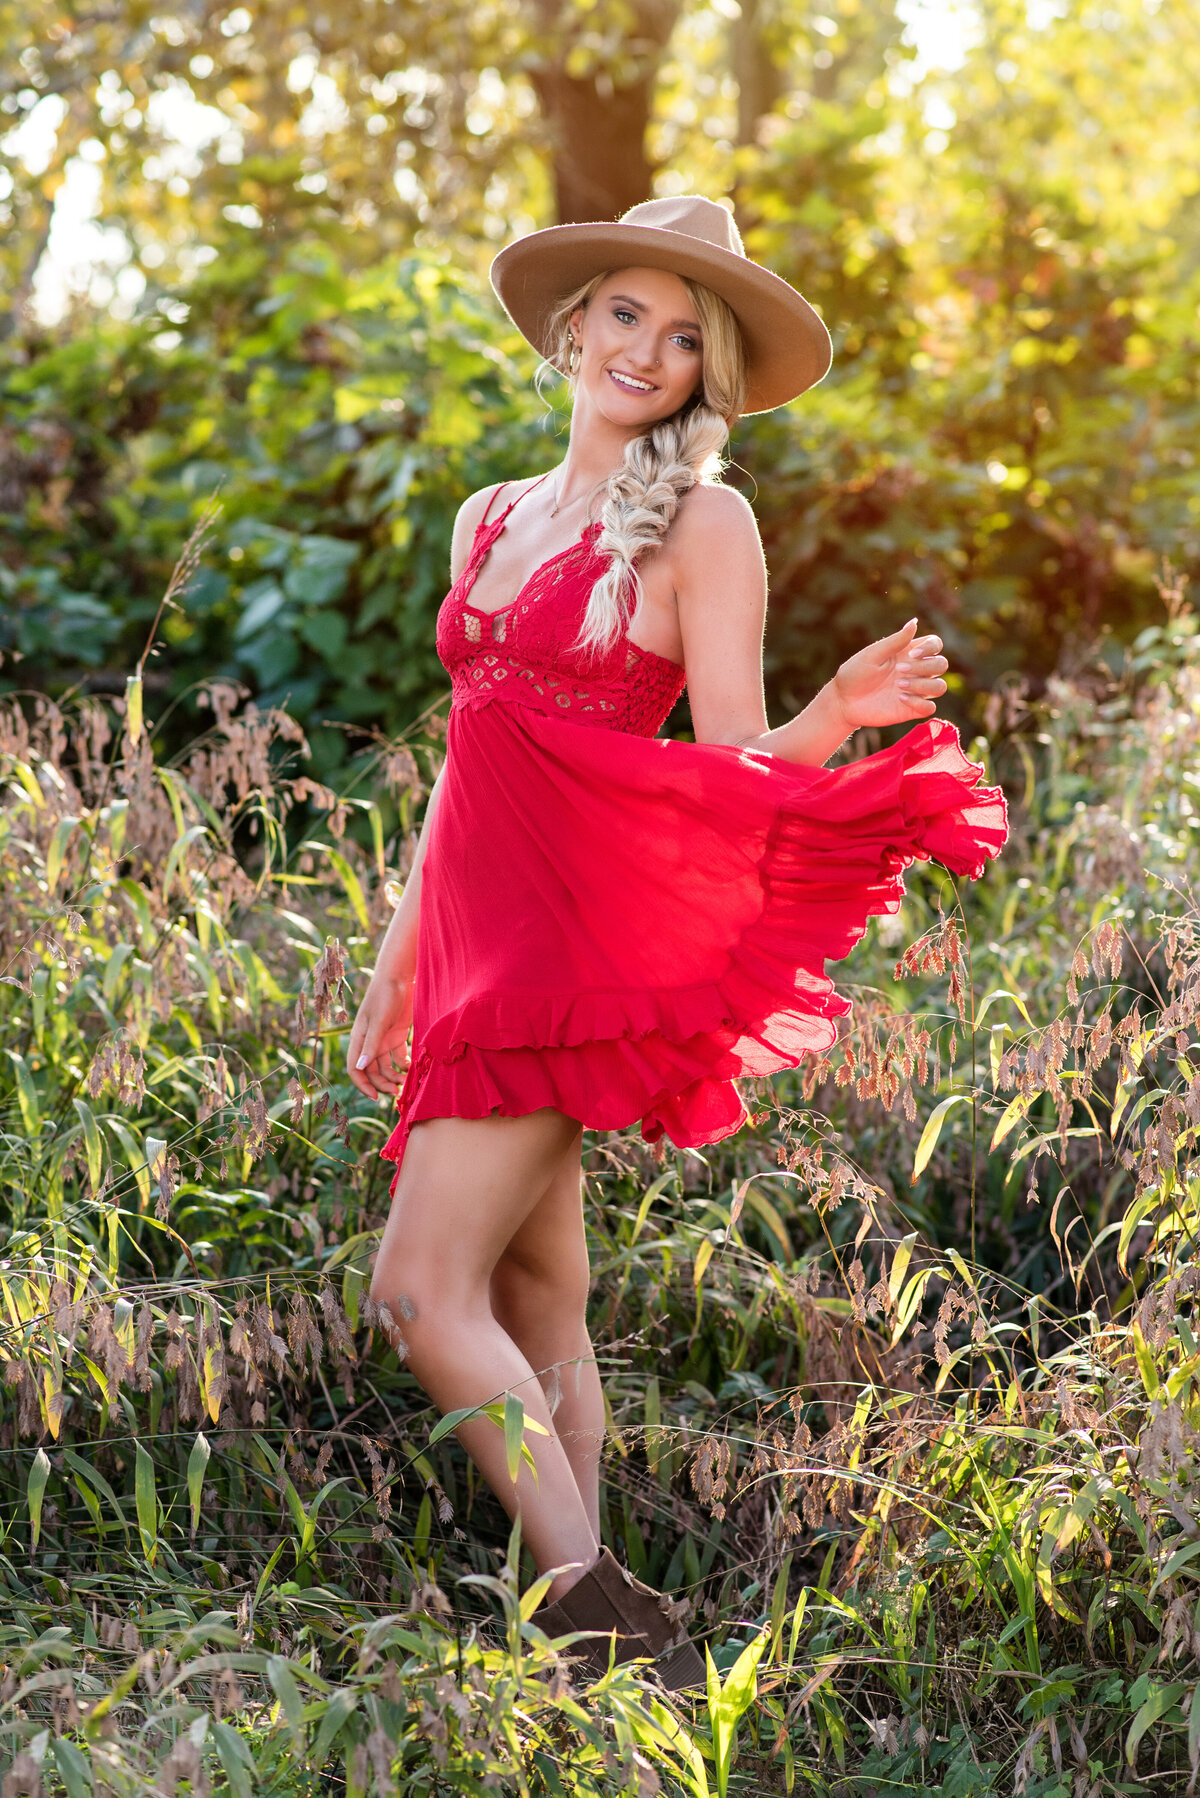 Clover Hill high school girl dances wearing red dress and tan hat in field of grass for her high school senior pictures.